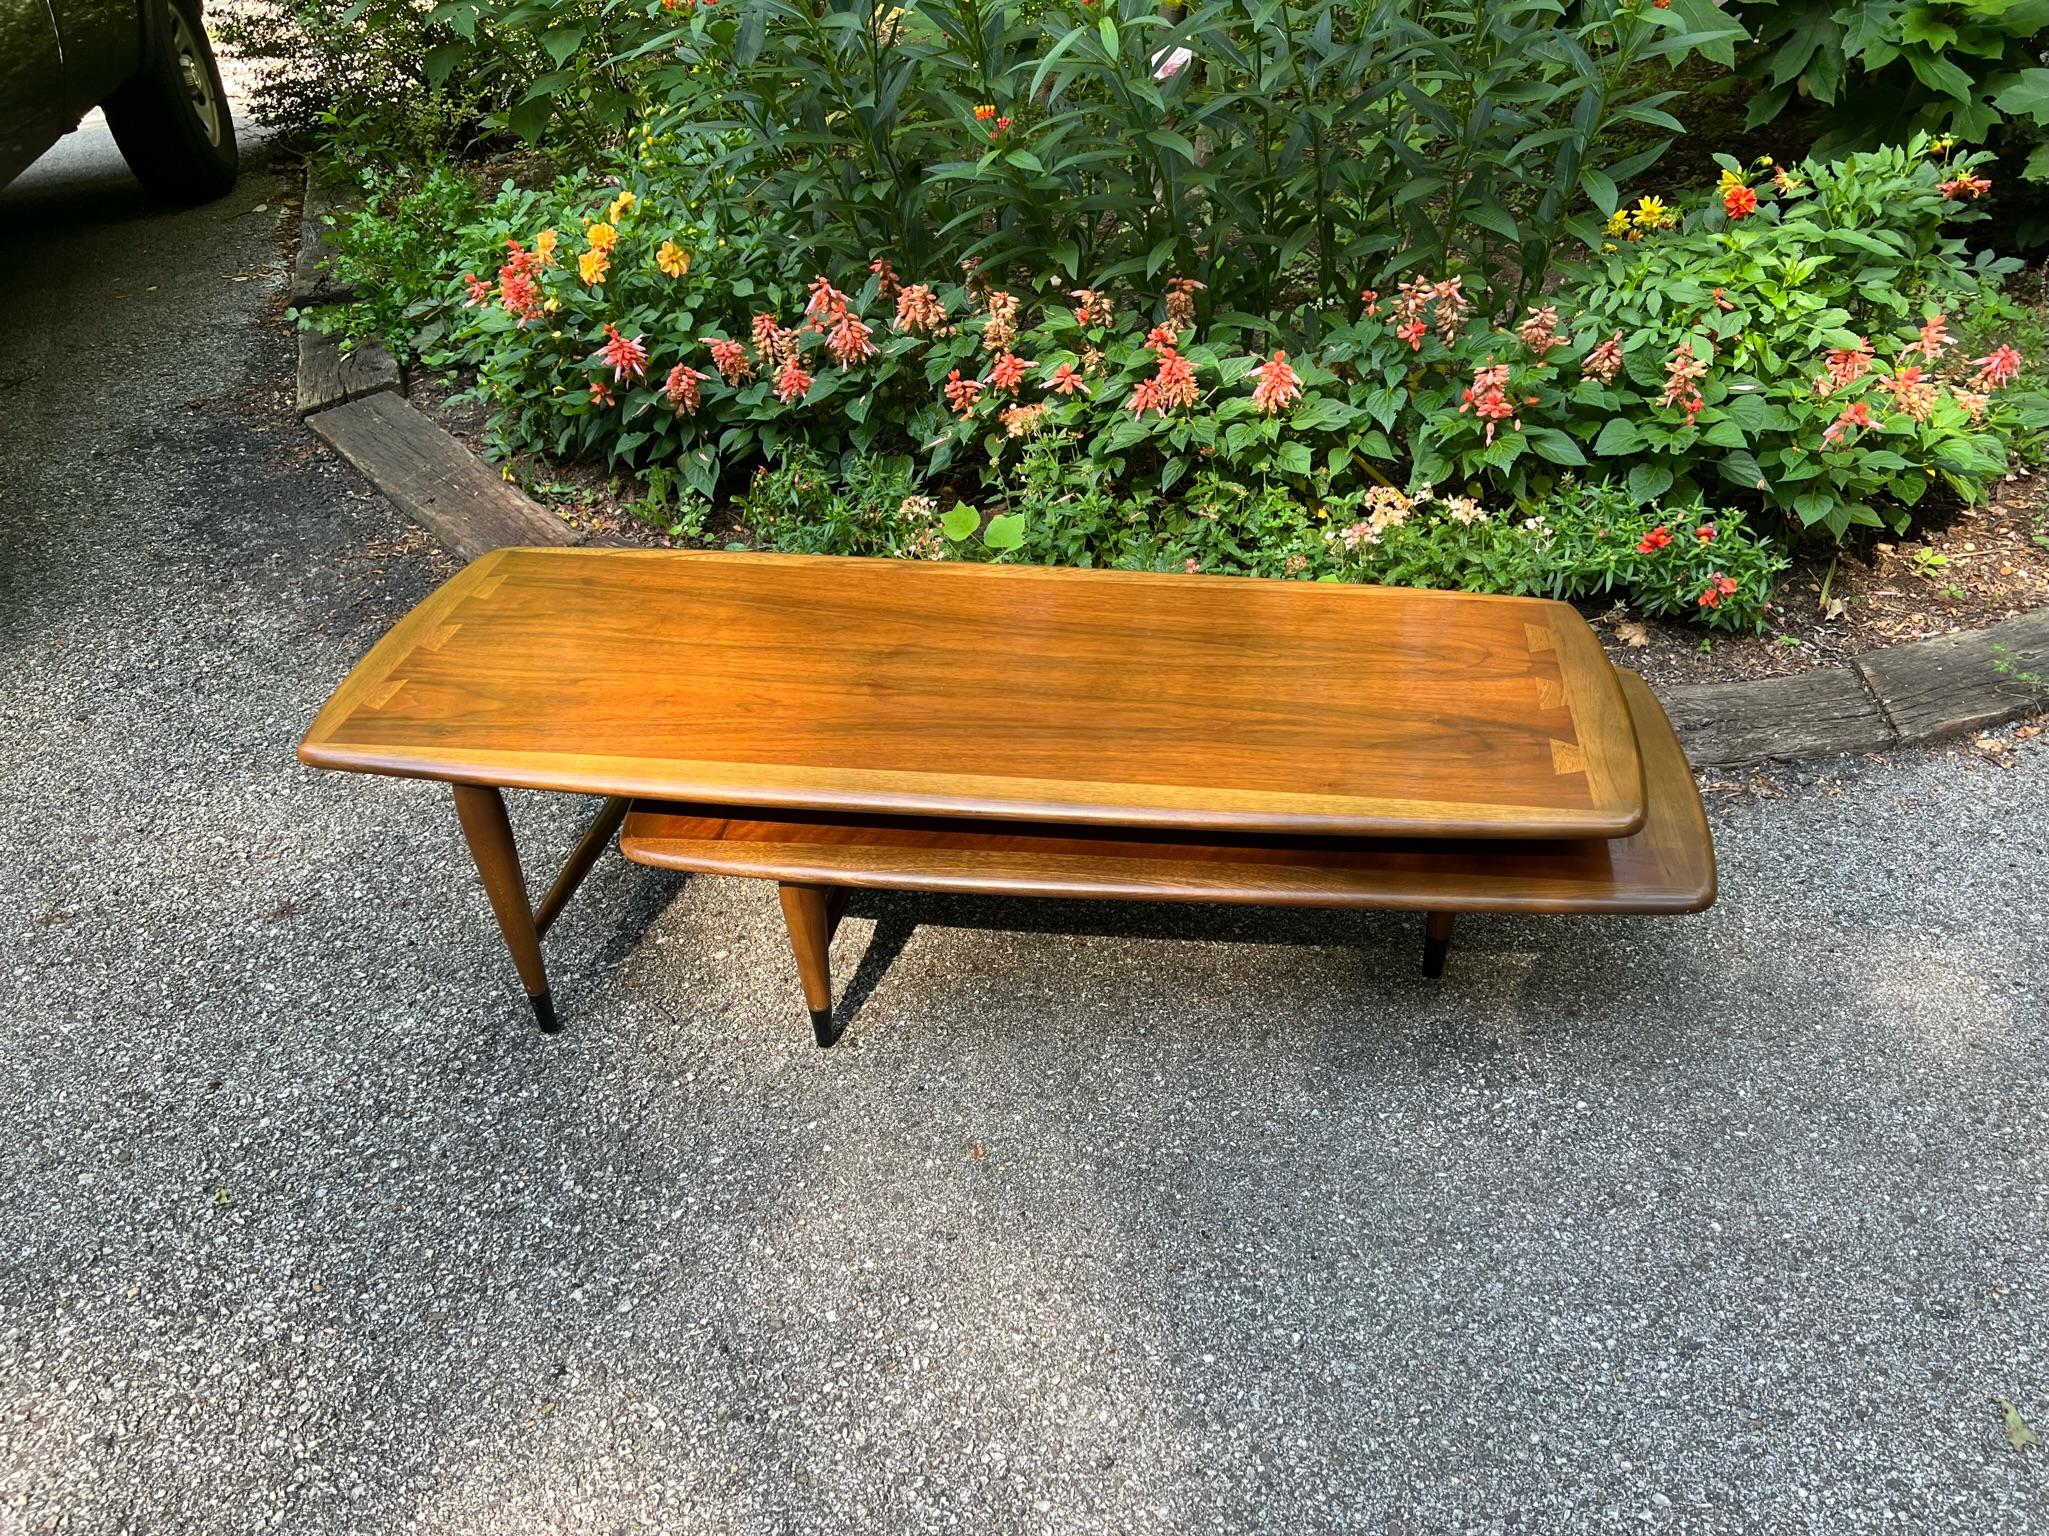 This two piece coffee table (referred to as the Switchblade Table or Boomerang Table) was part of the Acclaim design line by Andre Bus for Lane Furniture introduced in 1958. 

The table has original factory finish and is in like-new condition. The